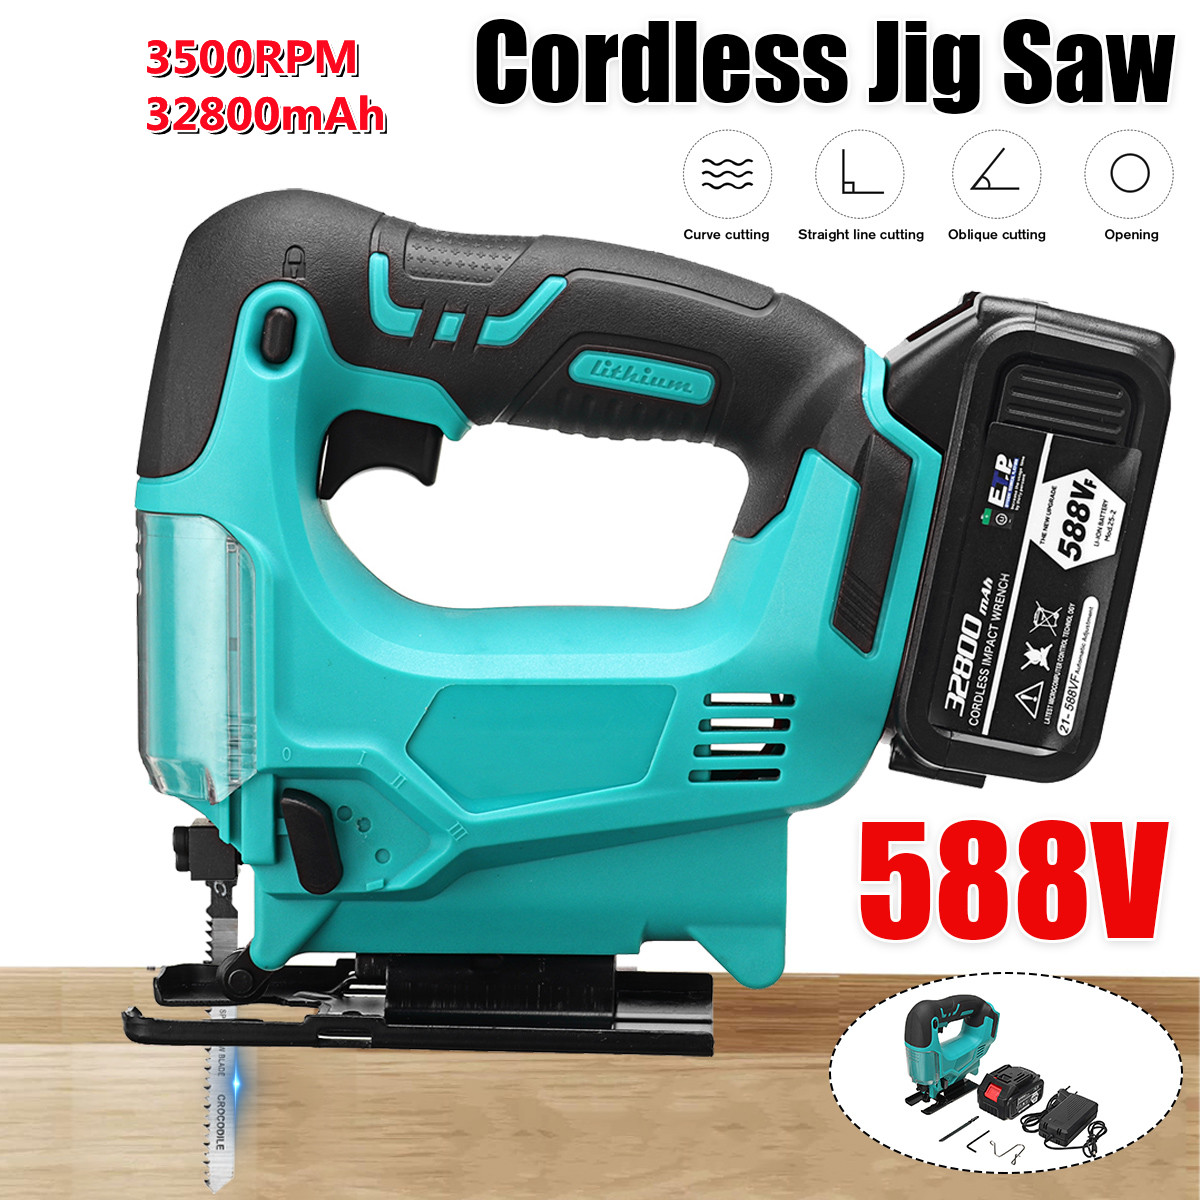 588VF-Electric-Jigsaw-Cordless-Portable-Woodworking-Cutting-Jig-Saw-Power-Tools-W-None12-Battery-1883229-2